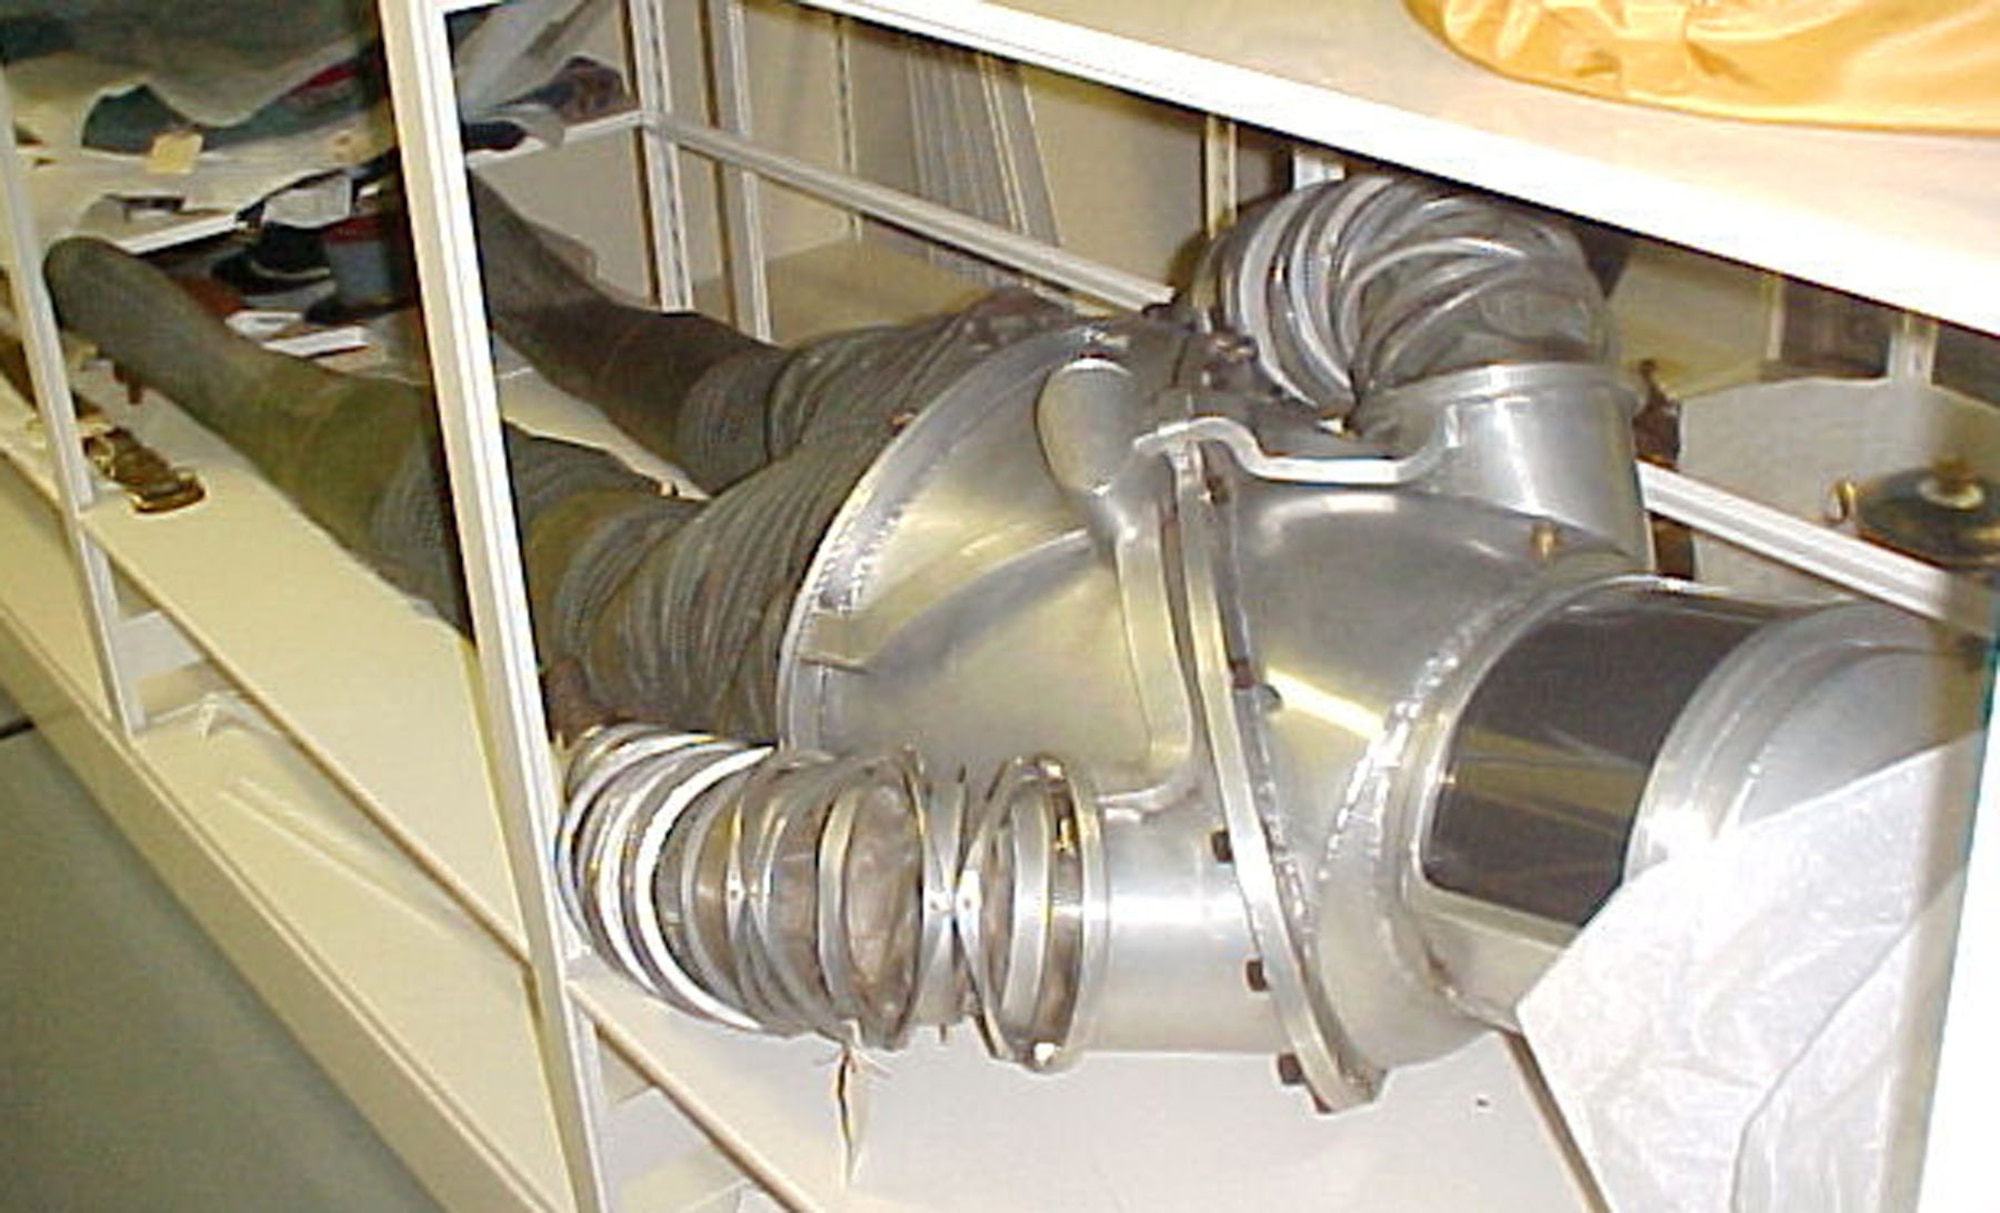 Based on a Litton "constant-volume" concept of the so-called "hard suit" of early 1955, the Mark I Extravehicular and Lunar Surface Suit was tested during the 1958-1959 period for more than 600 hours at simulated altitudes exceeding 100 miles. The unique construction of this suit permitted almost a full range of body motions by the person wearing it. (U.S. Air Force photo)